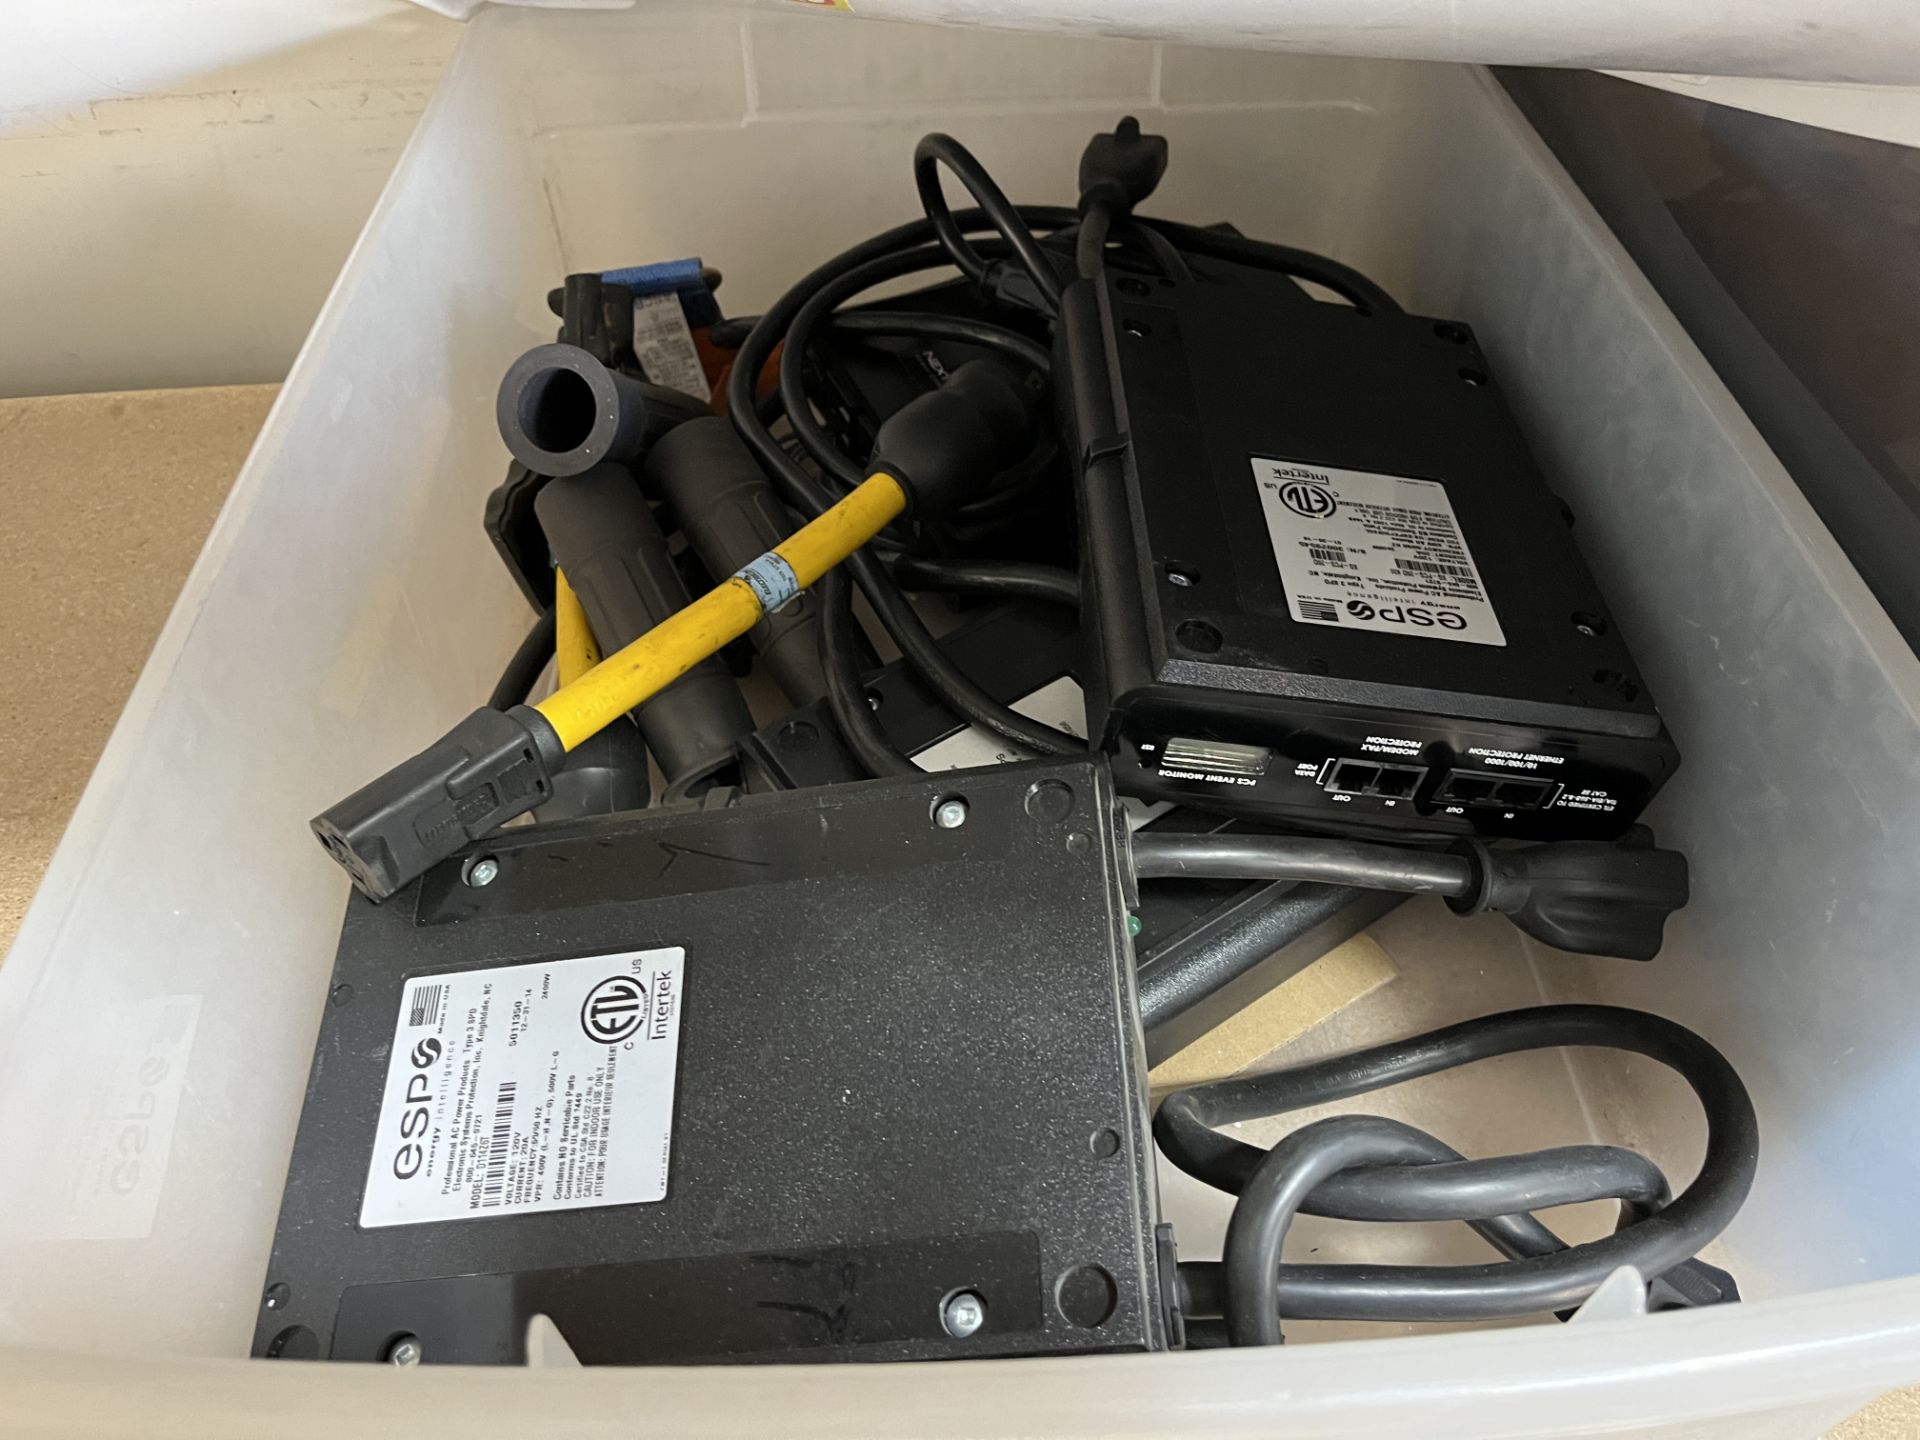 6 PLASTIC BINS OF CABLES, POWER CORDS, POWER FILTERS, ETC - Image 12 of 15